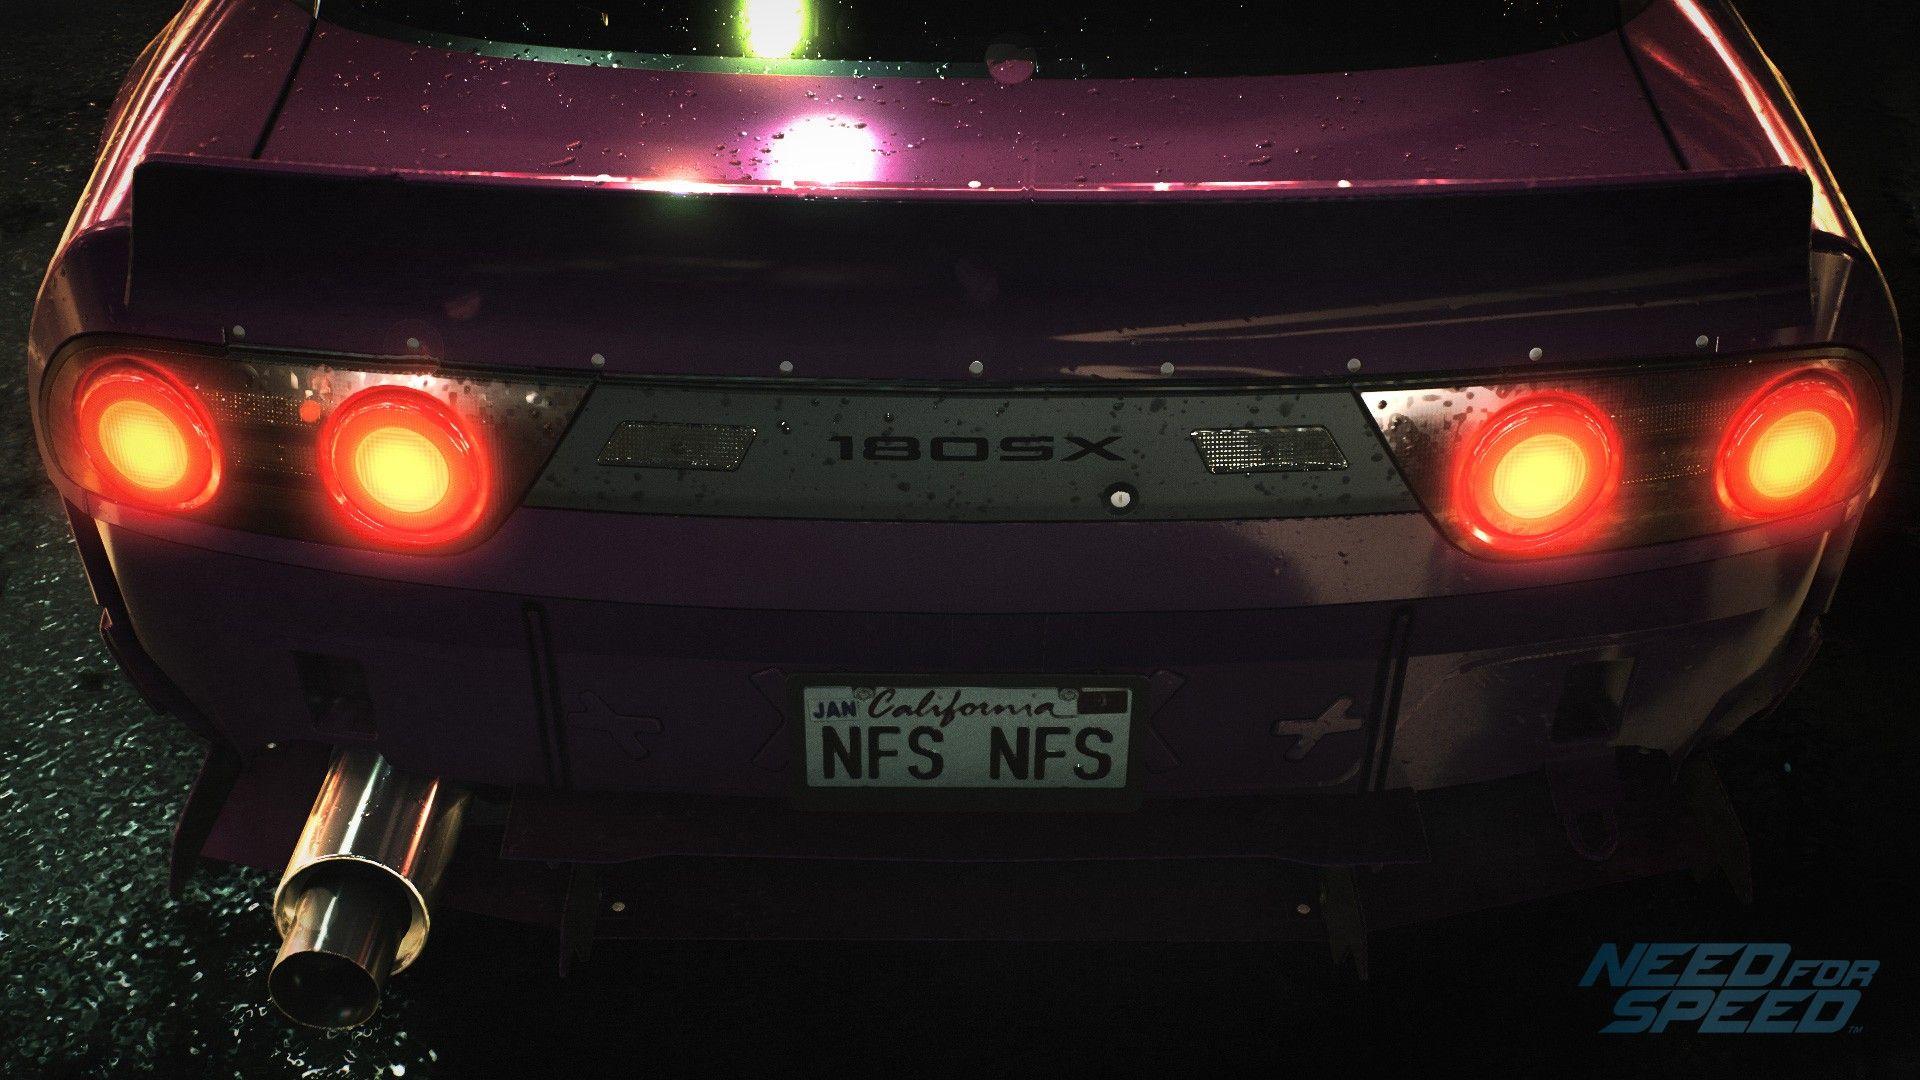 anime, Racing, Car, Video Games, Need For Speed, Nissan, Nissan